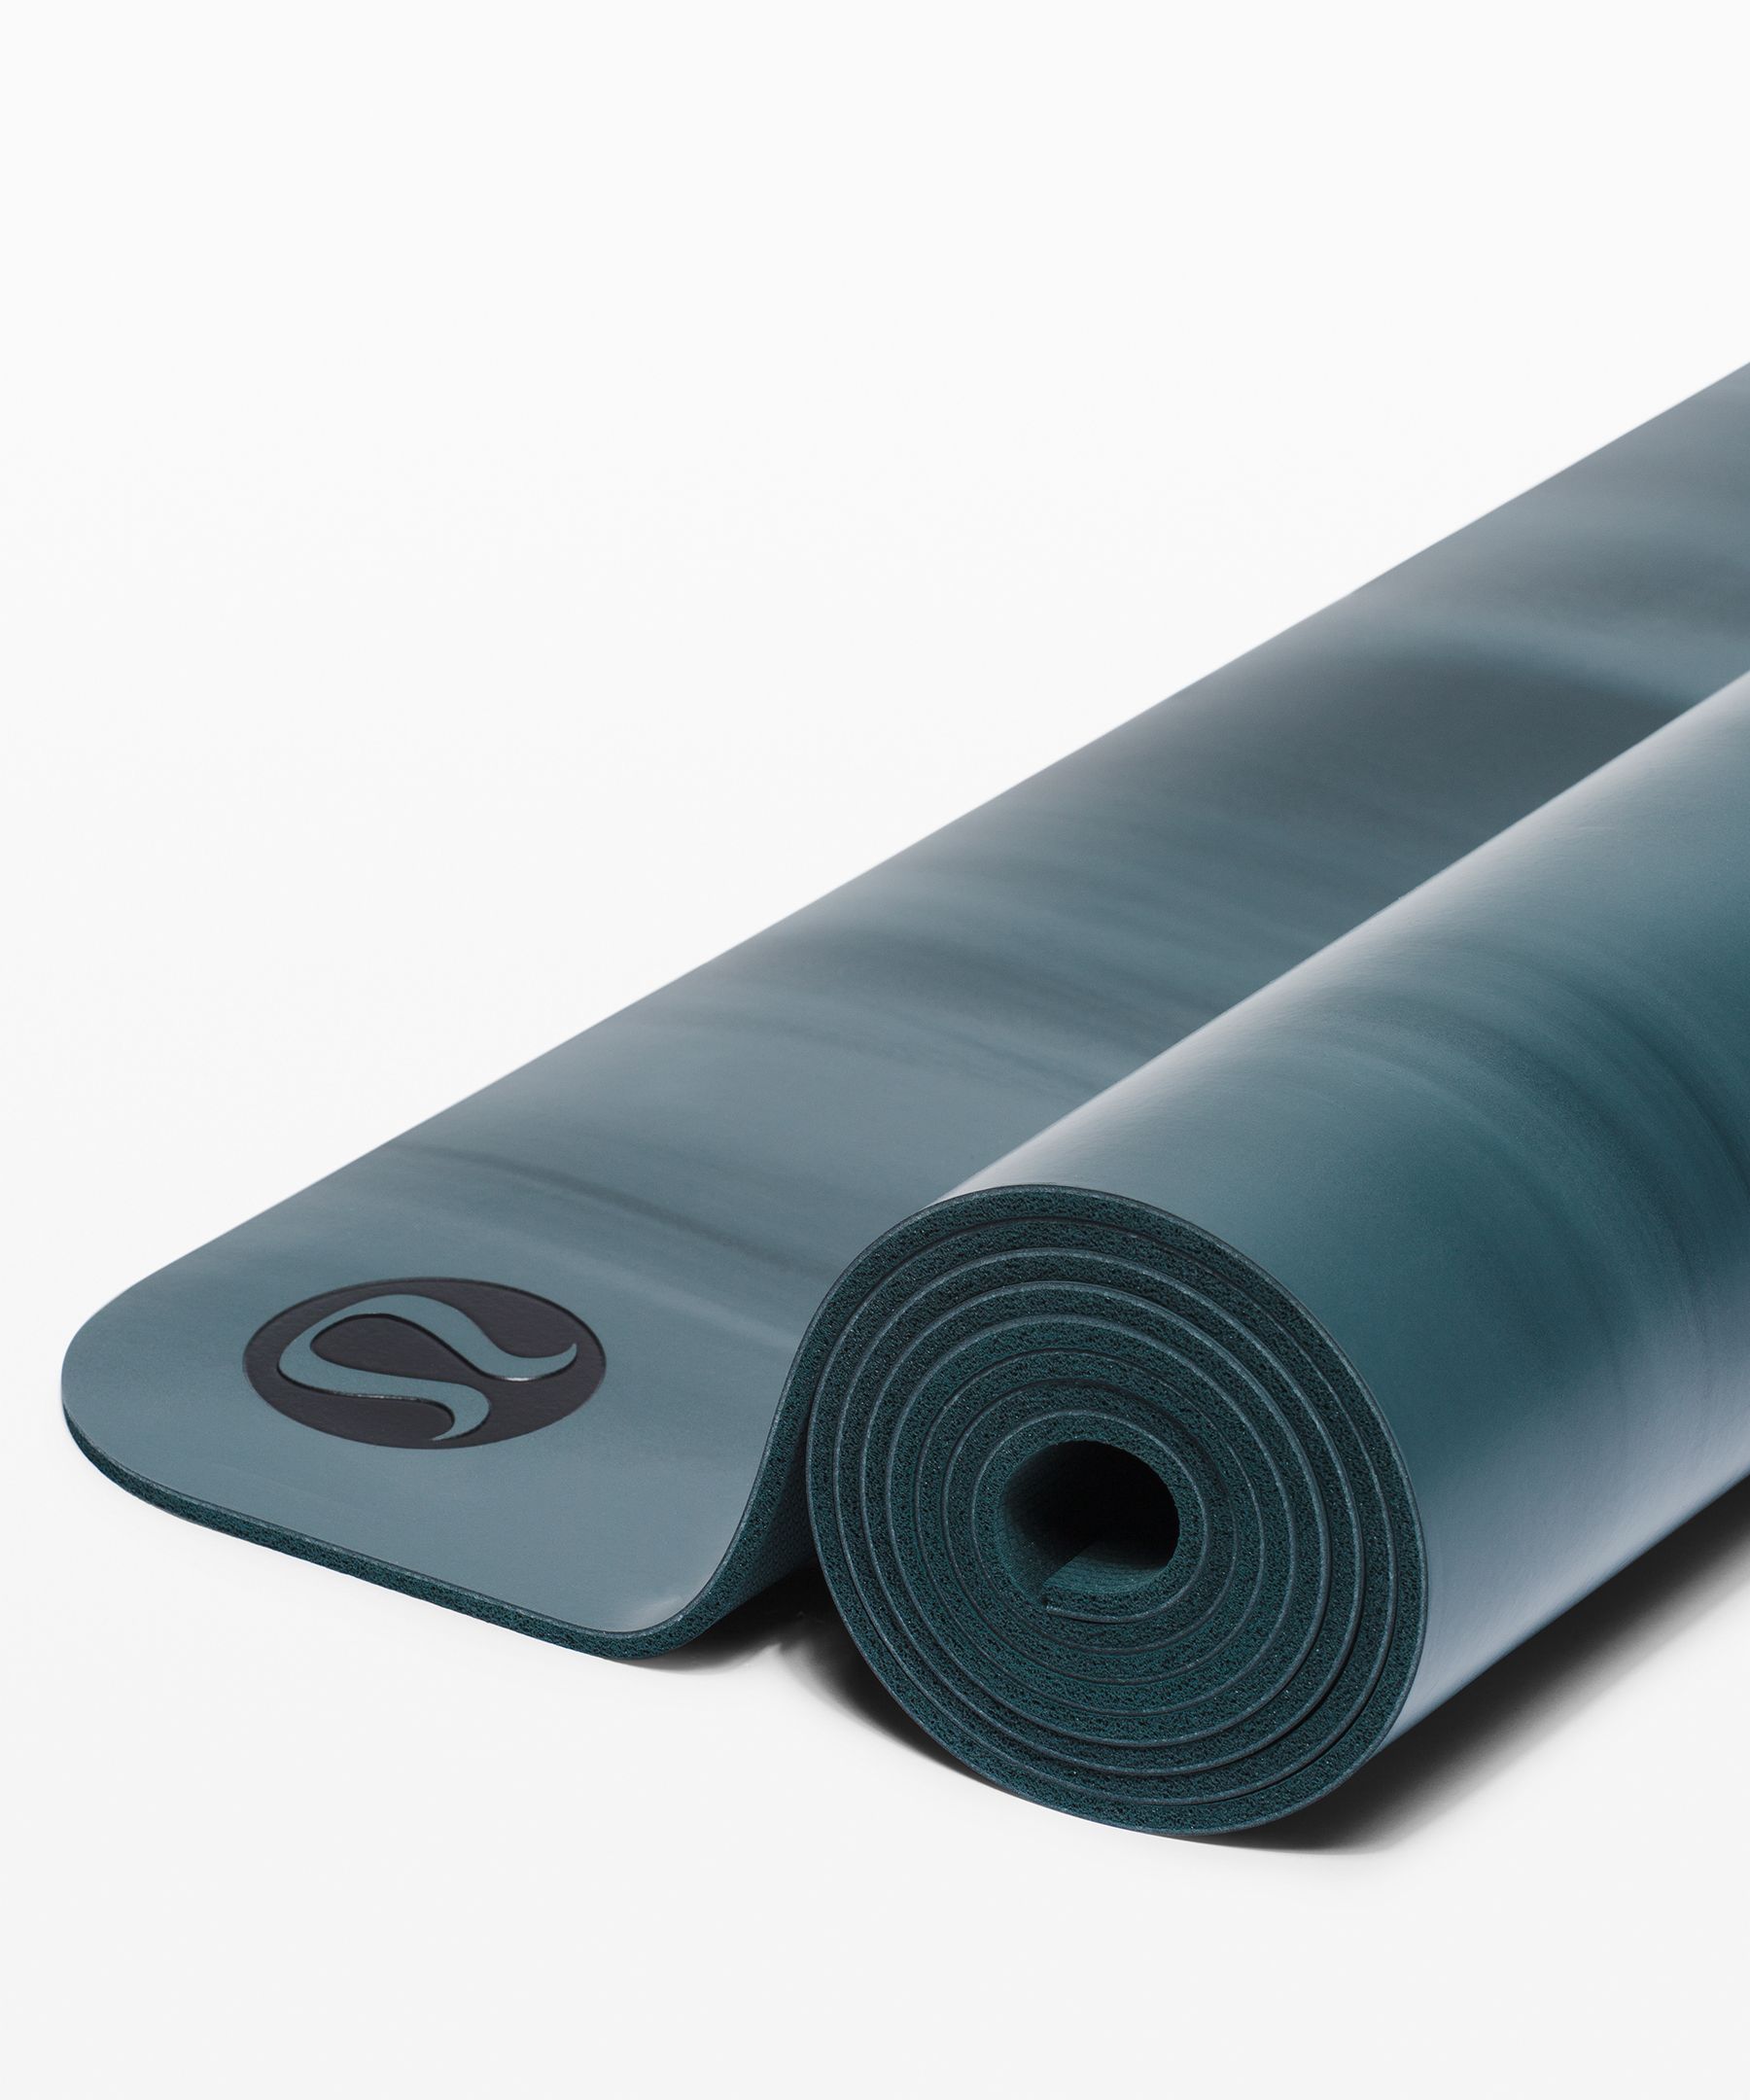 Carry Onwards Yoga Mat Review  International Society of Precision